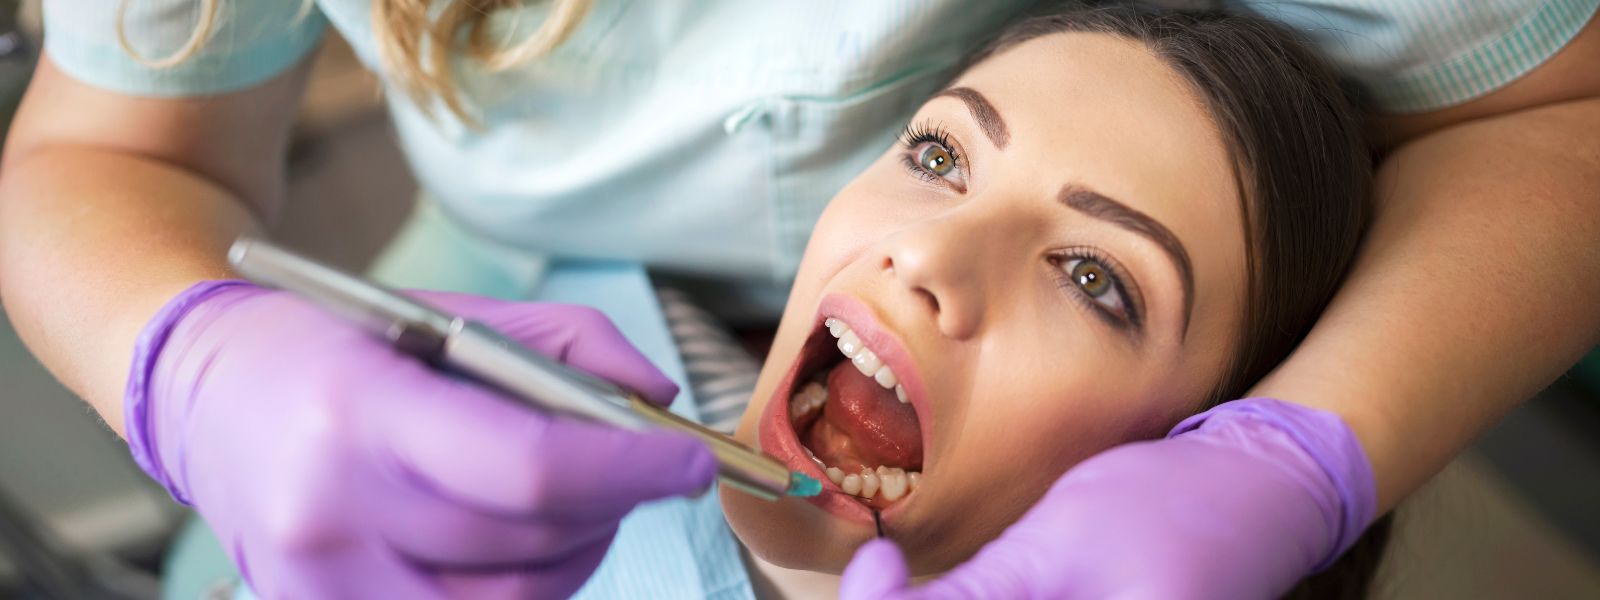 Visit your dentist for regular checkups and cleanings. This helps to identify and treat any problems early on.